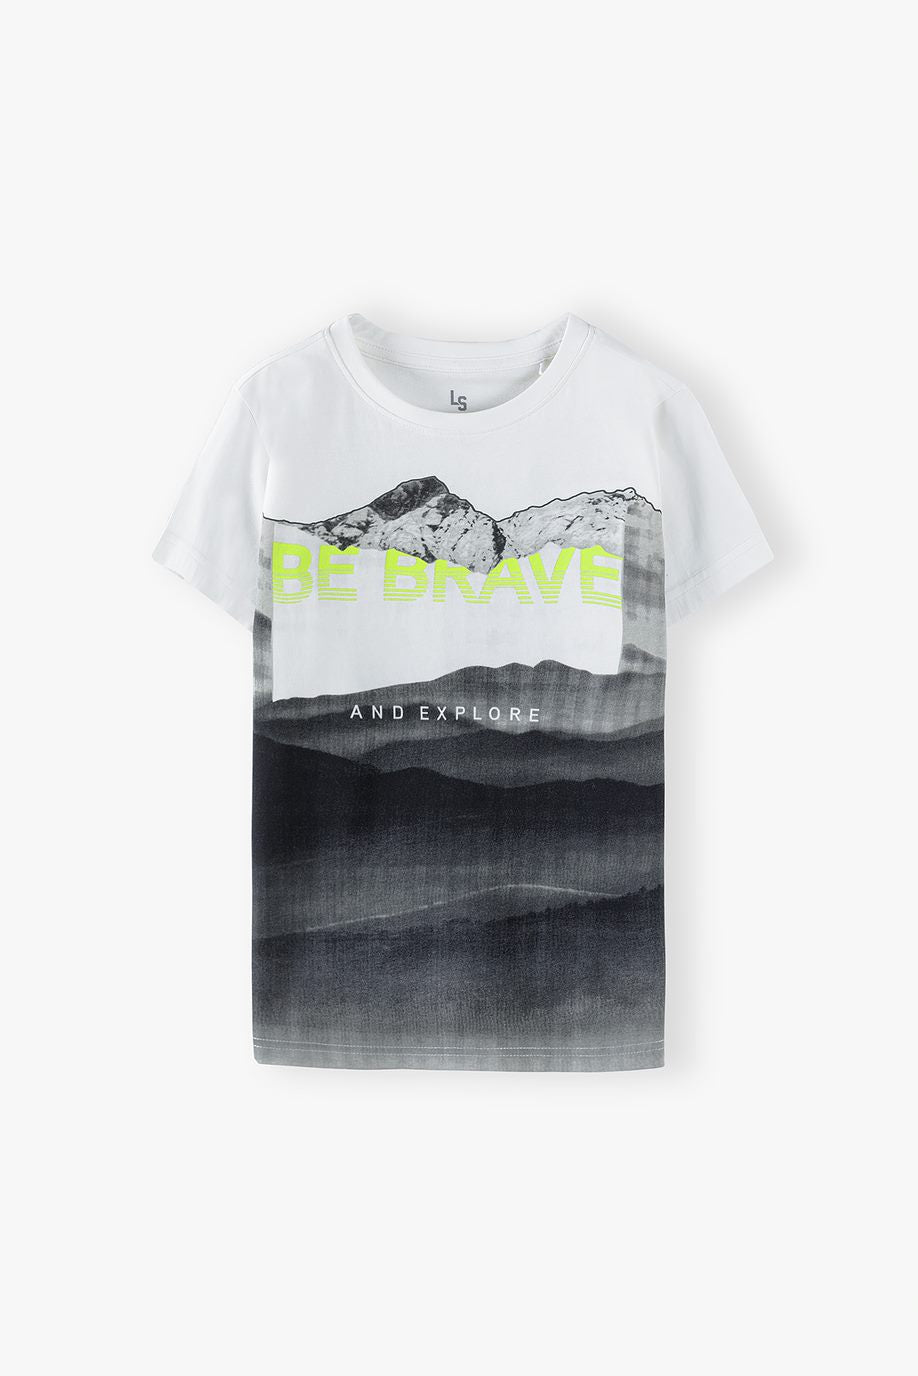 T-Shirt - Be brave and explore